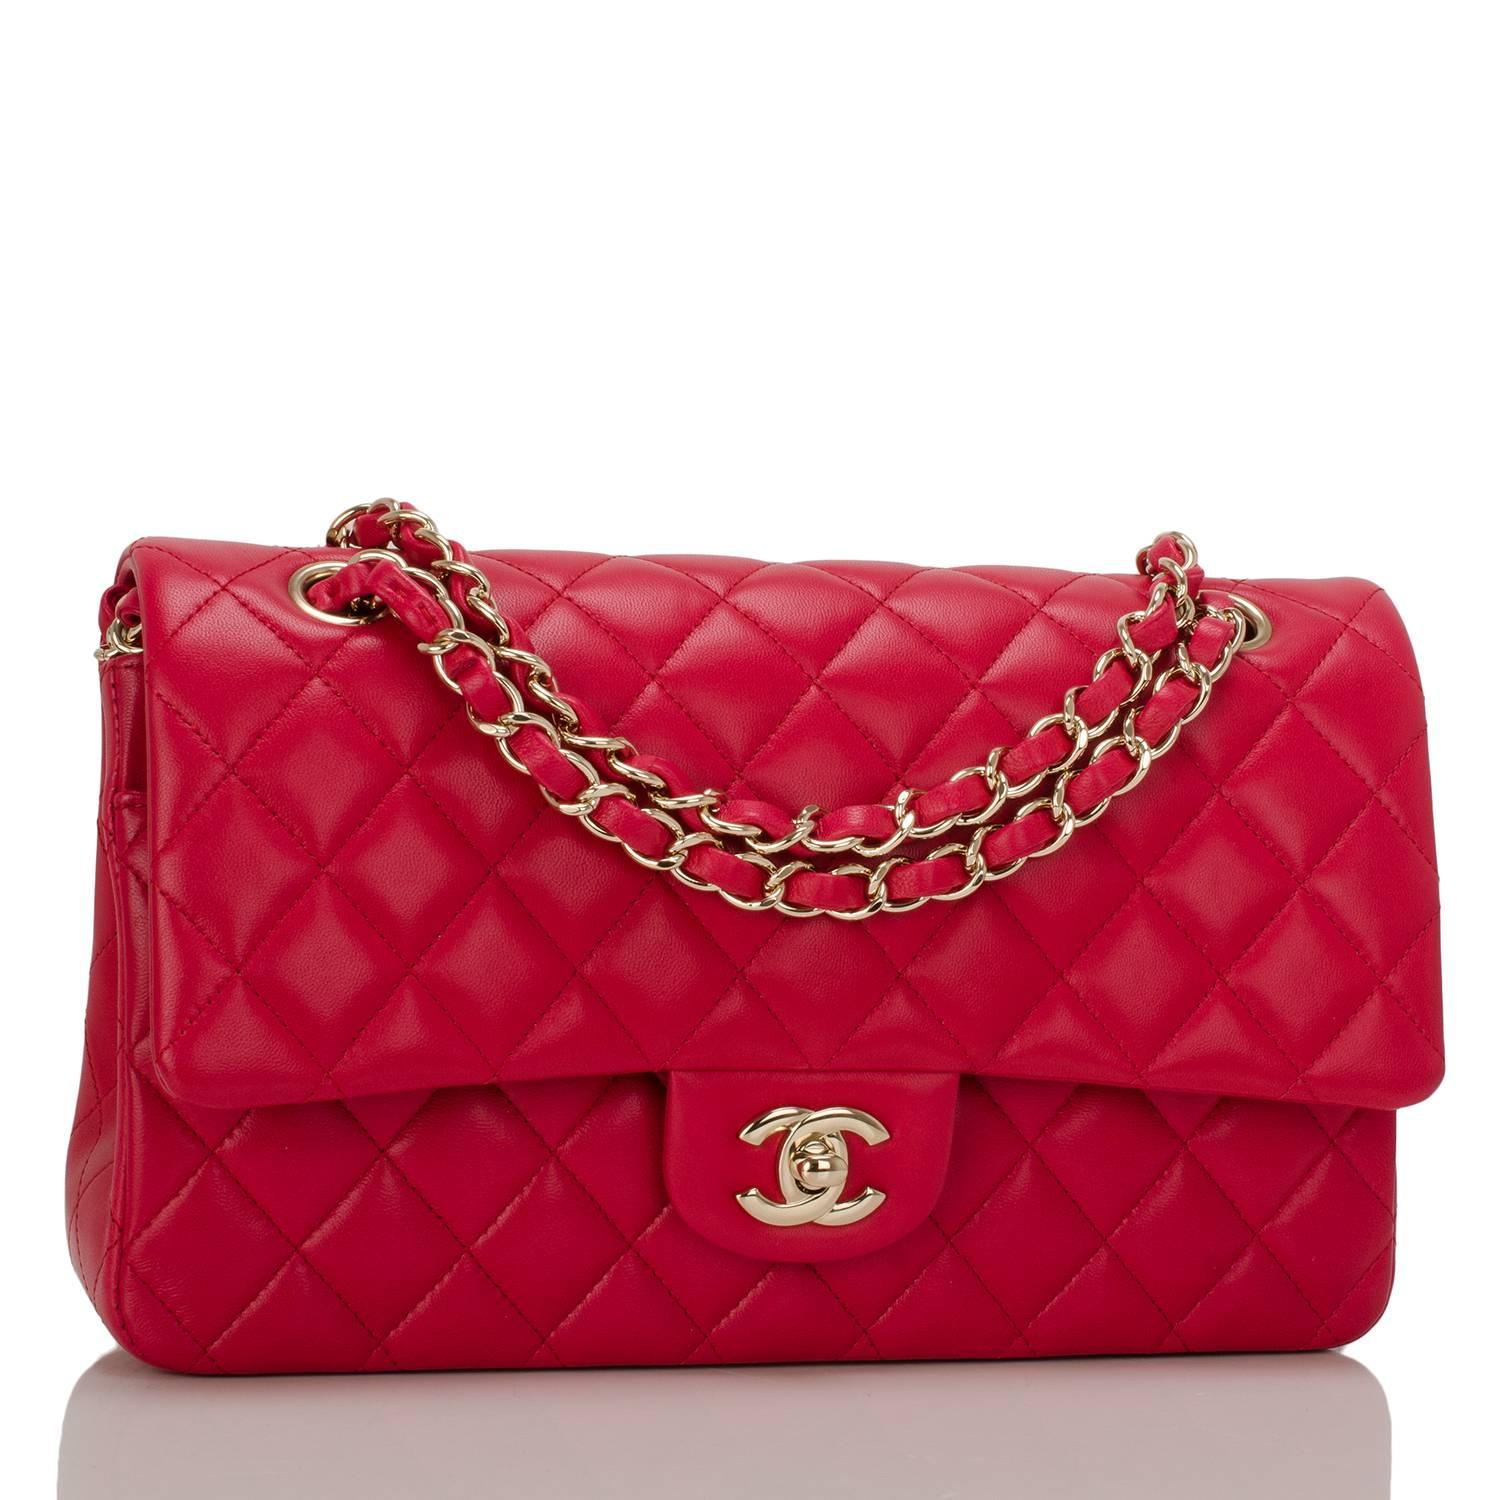 This Chanel red medium Classic Double Flap bag is made of quilted lambskin leather and accented with light gold tone hardware.

The bag features a full front flap with signature CC turnlock closure, a half moon back pocket and an adjustable